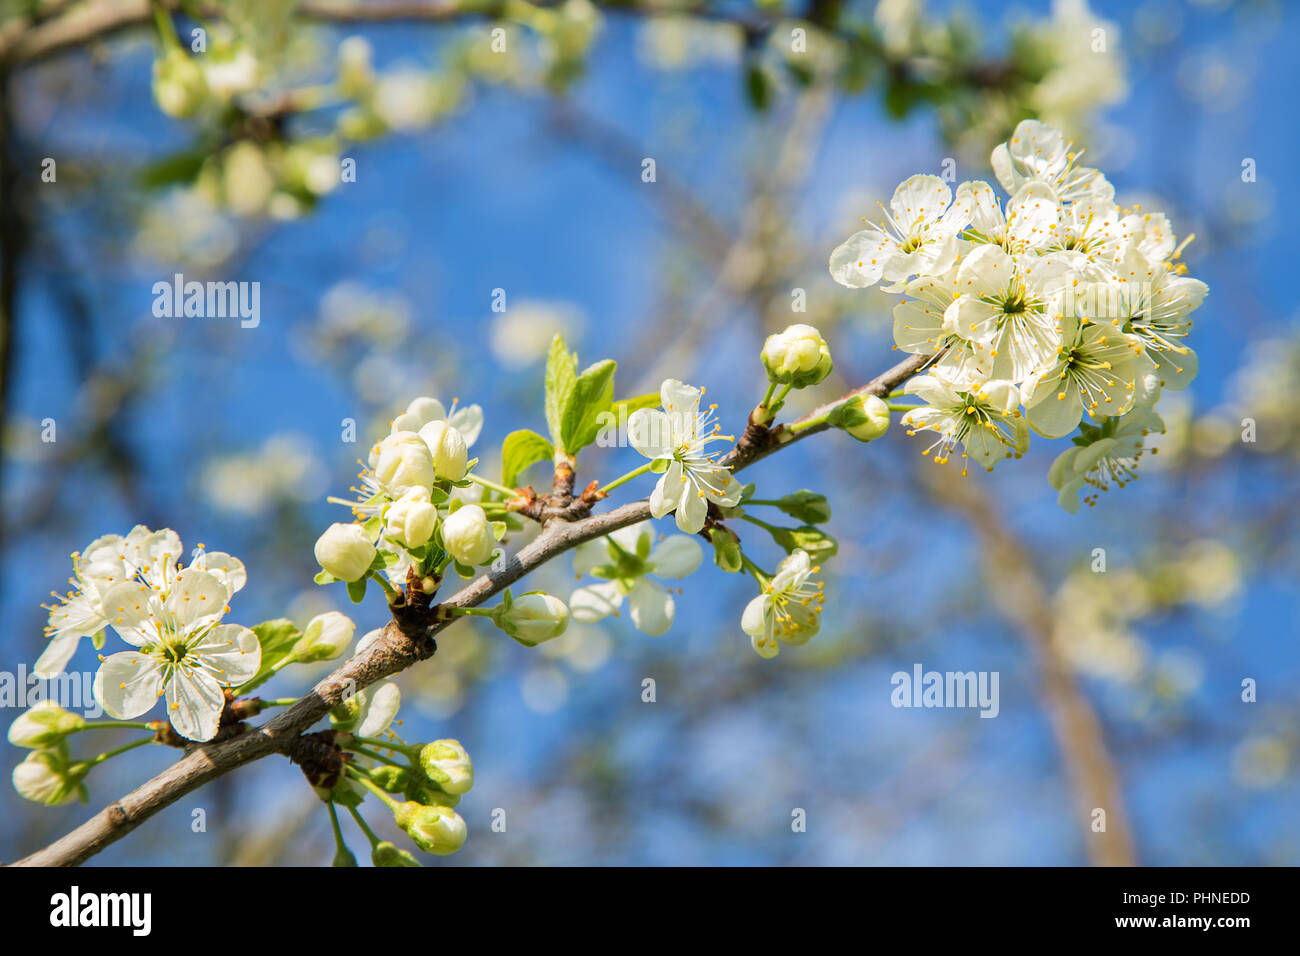 Tree branch with flowers against the sky with clouds Stock Photo